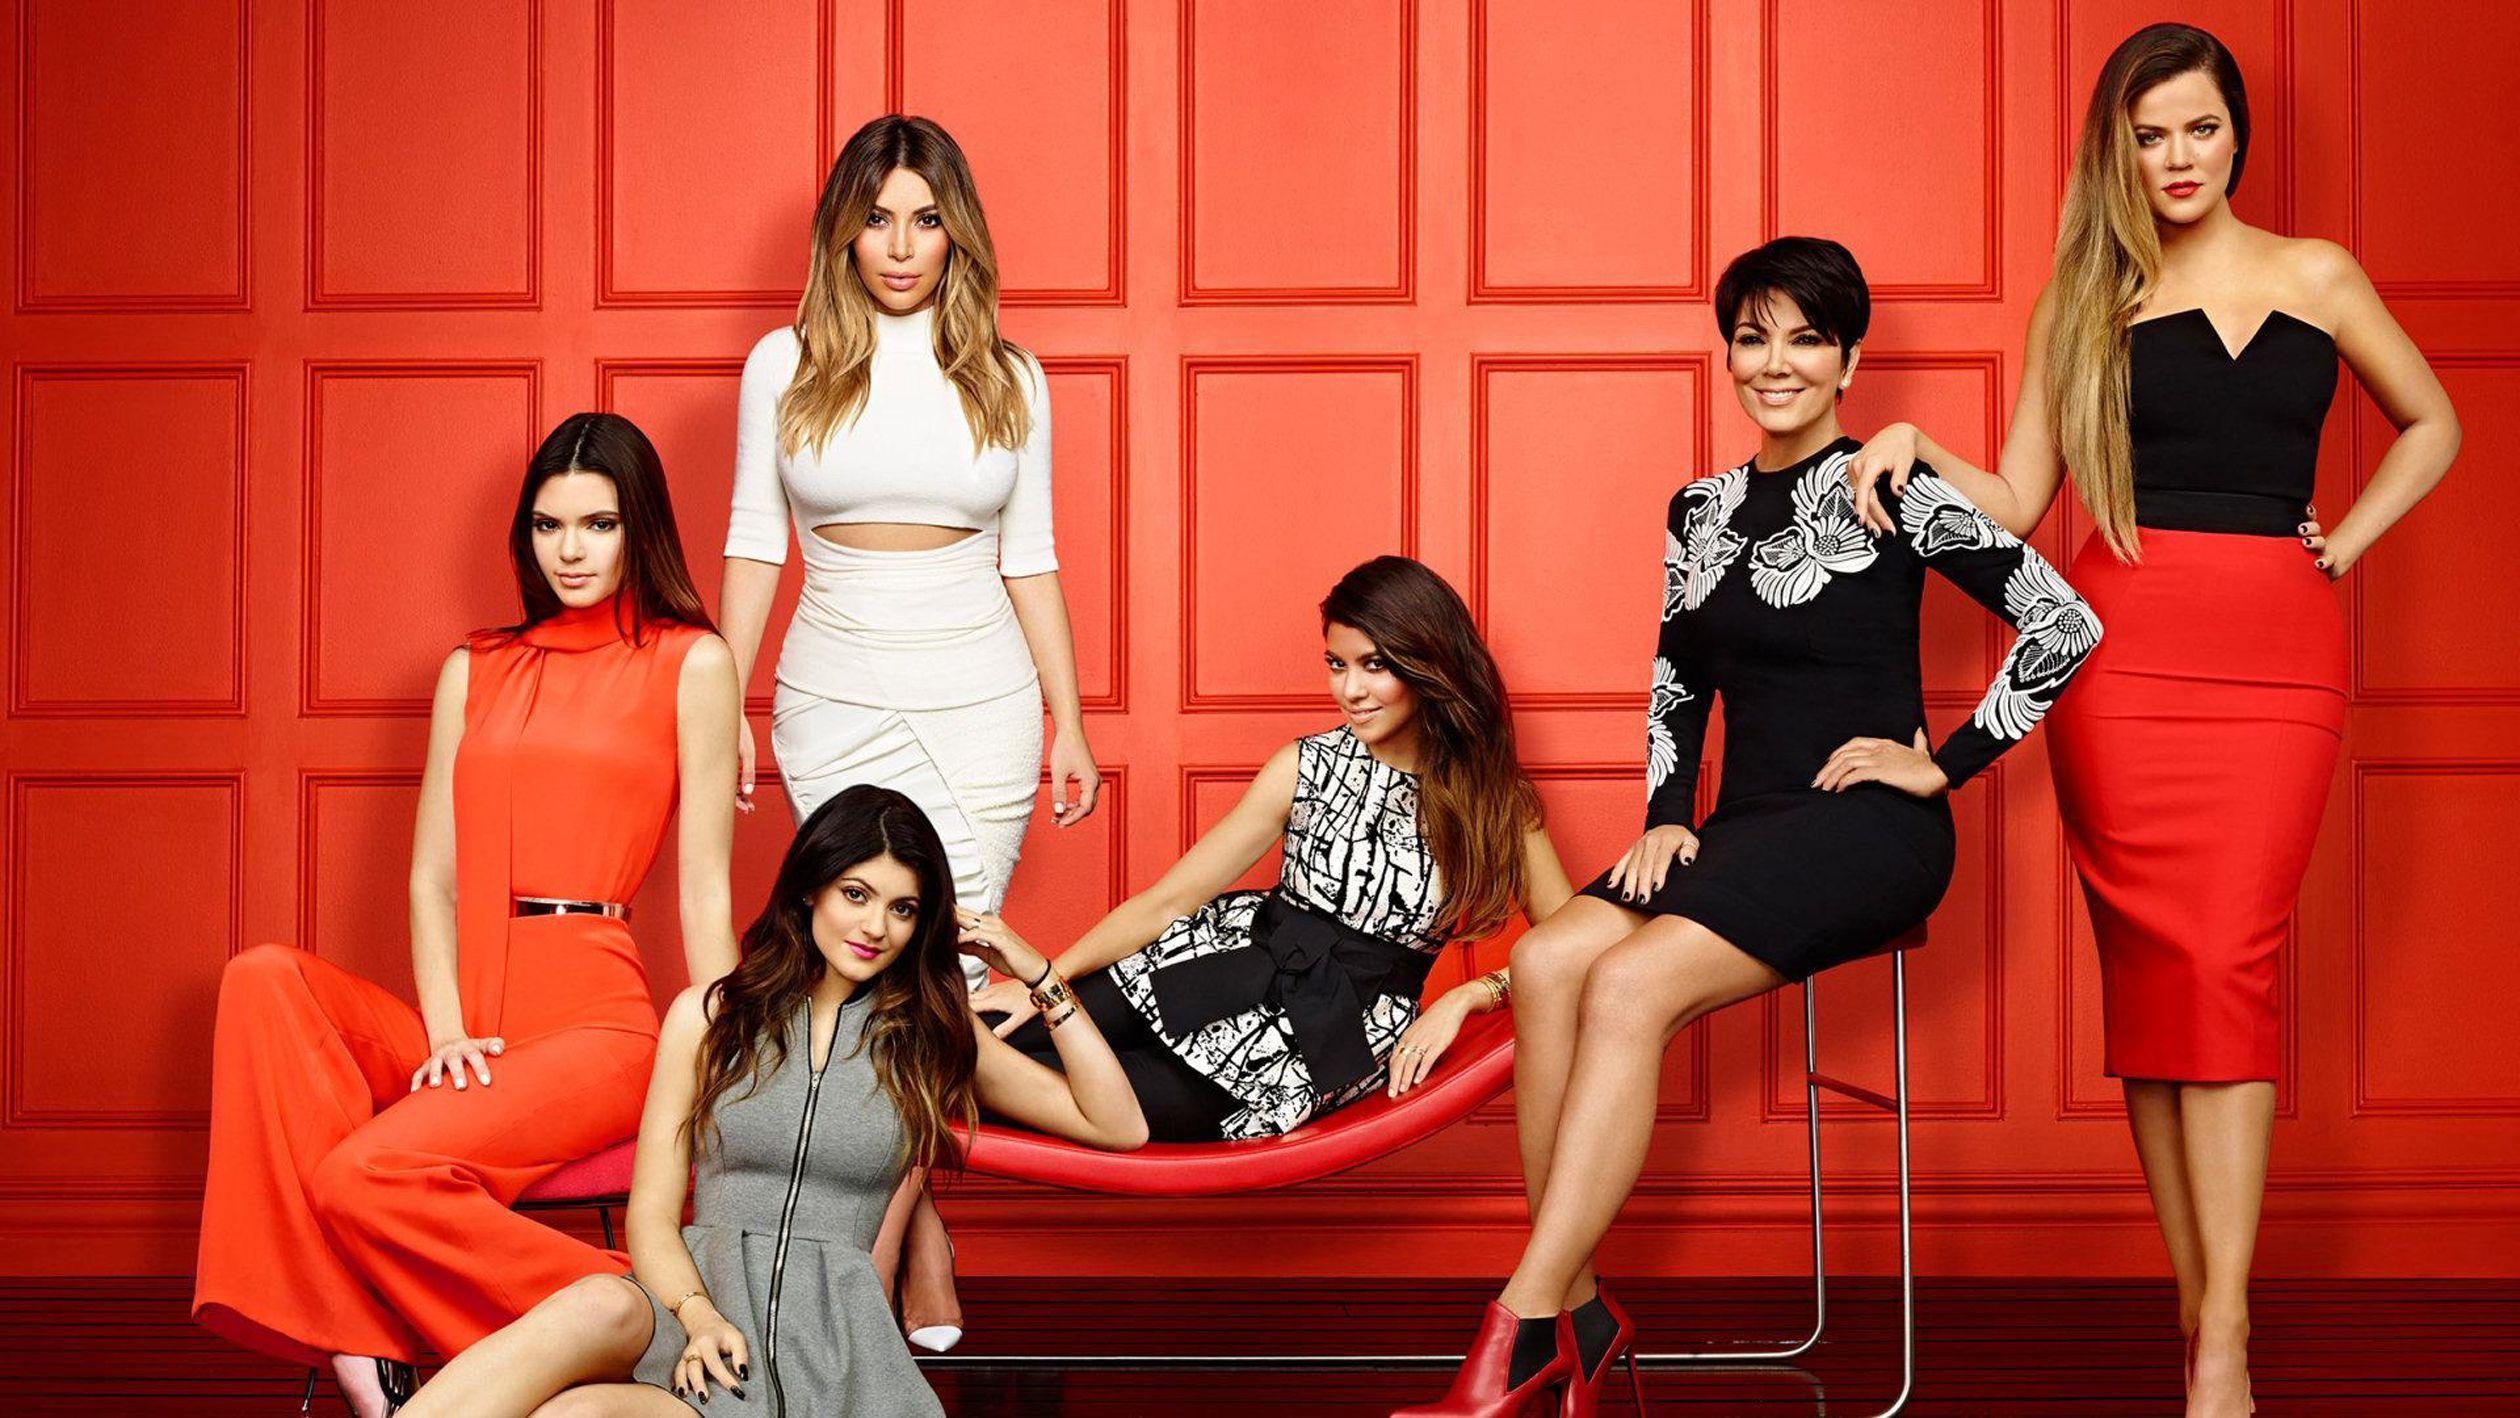 If You Had to Narrow Down the Allure of the Kardashians to Just One